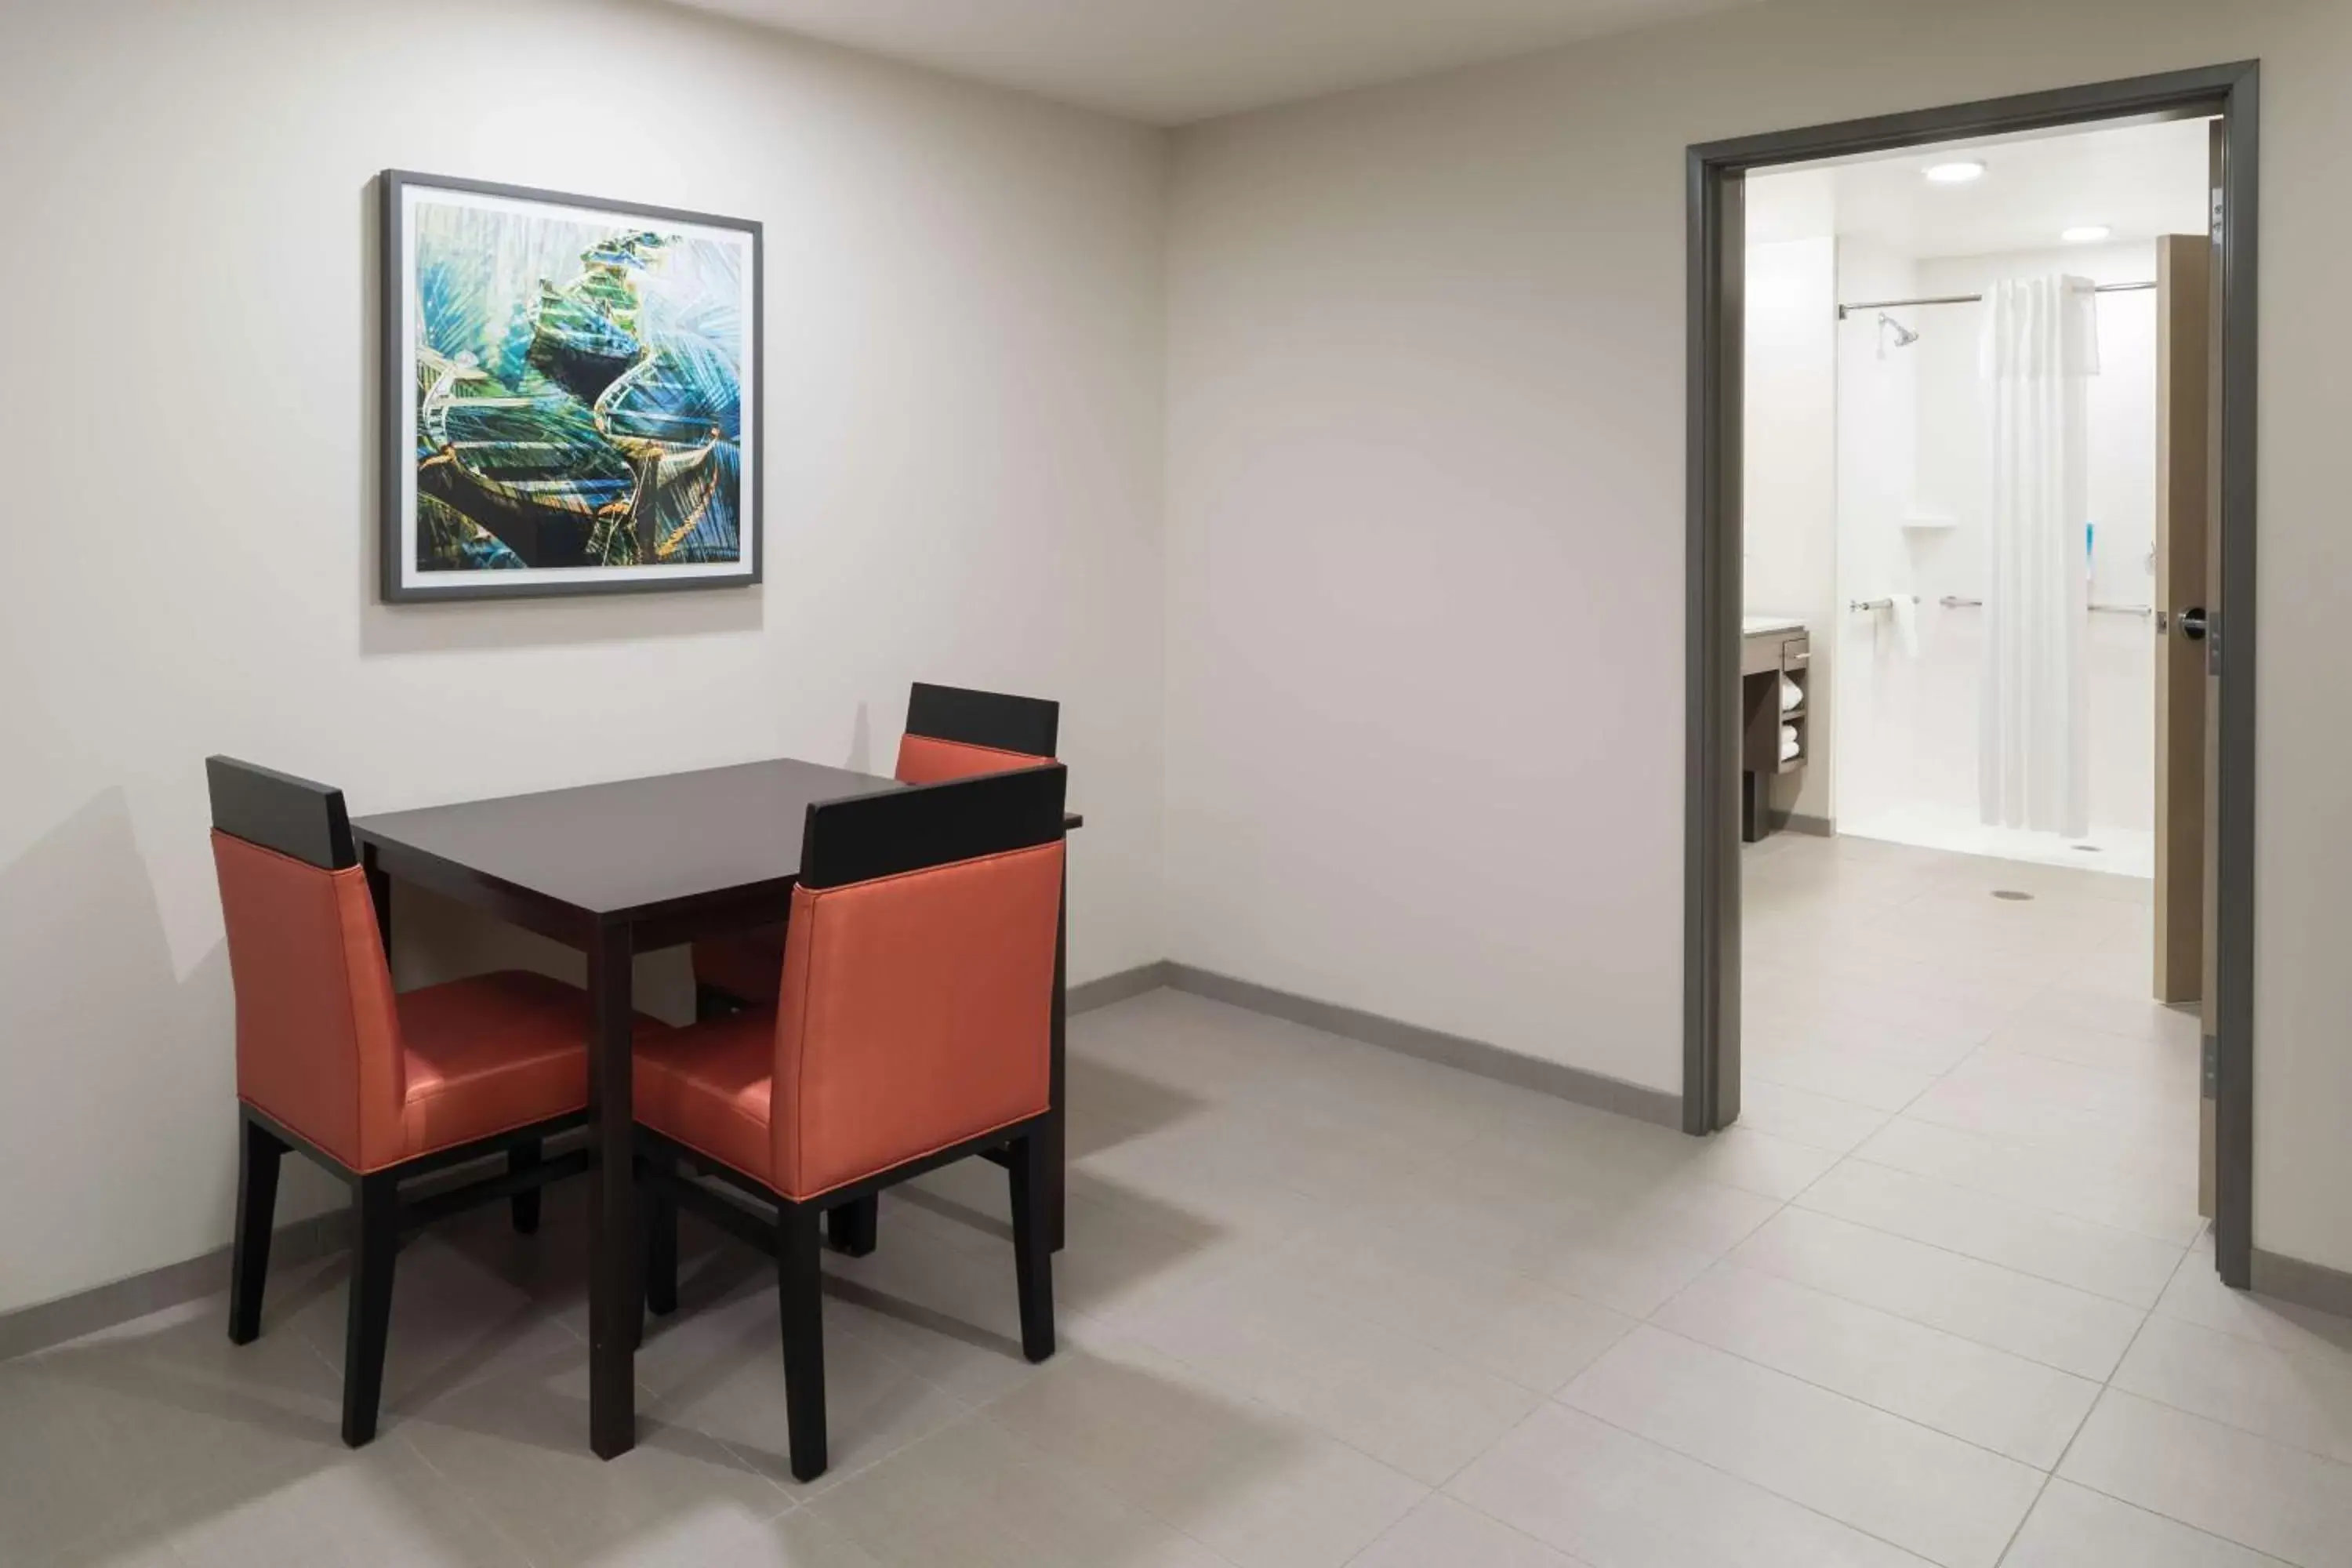 Bathroom, Dining Area in Home2 Suites By Hilton Cape Canaveral Cruise Port